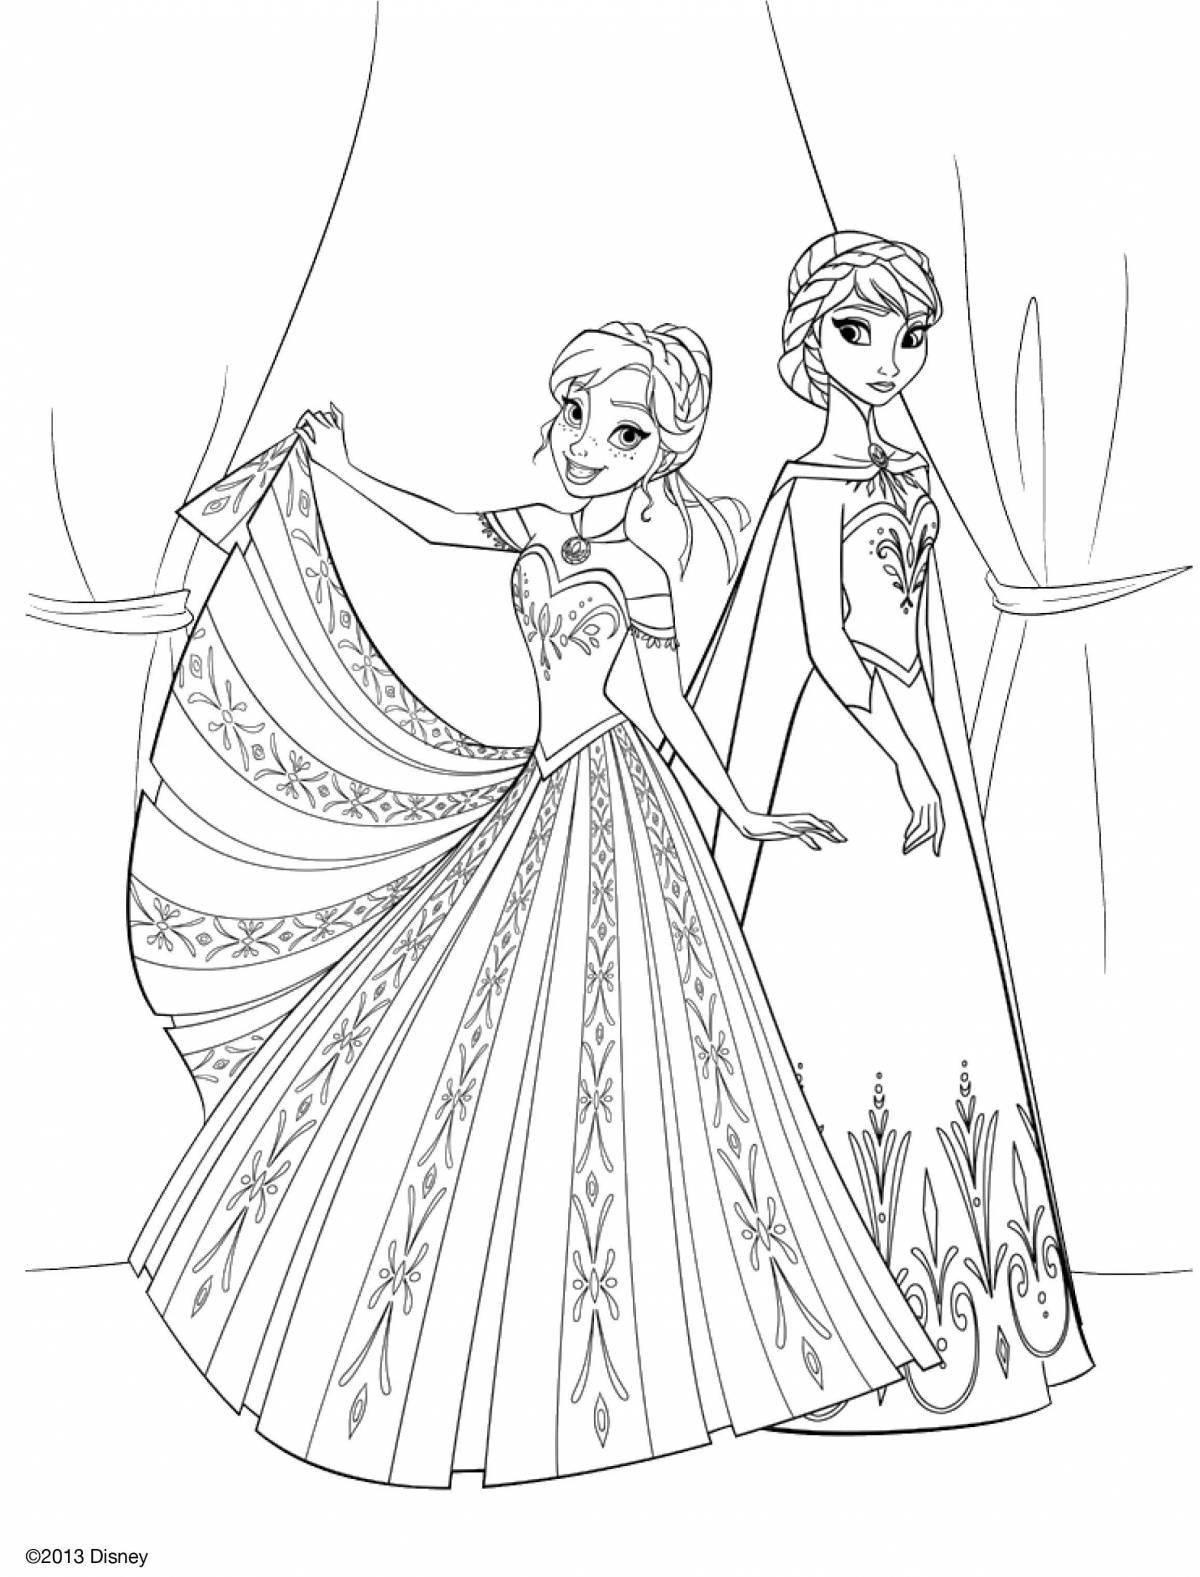 Colorful princess anna coloring page